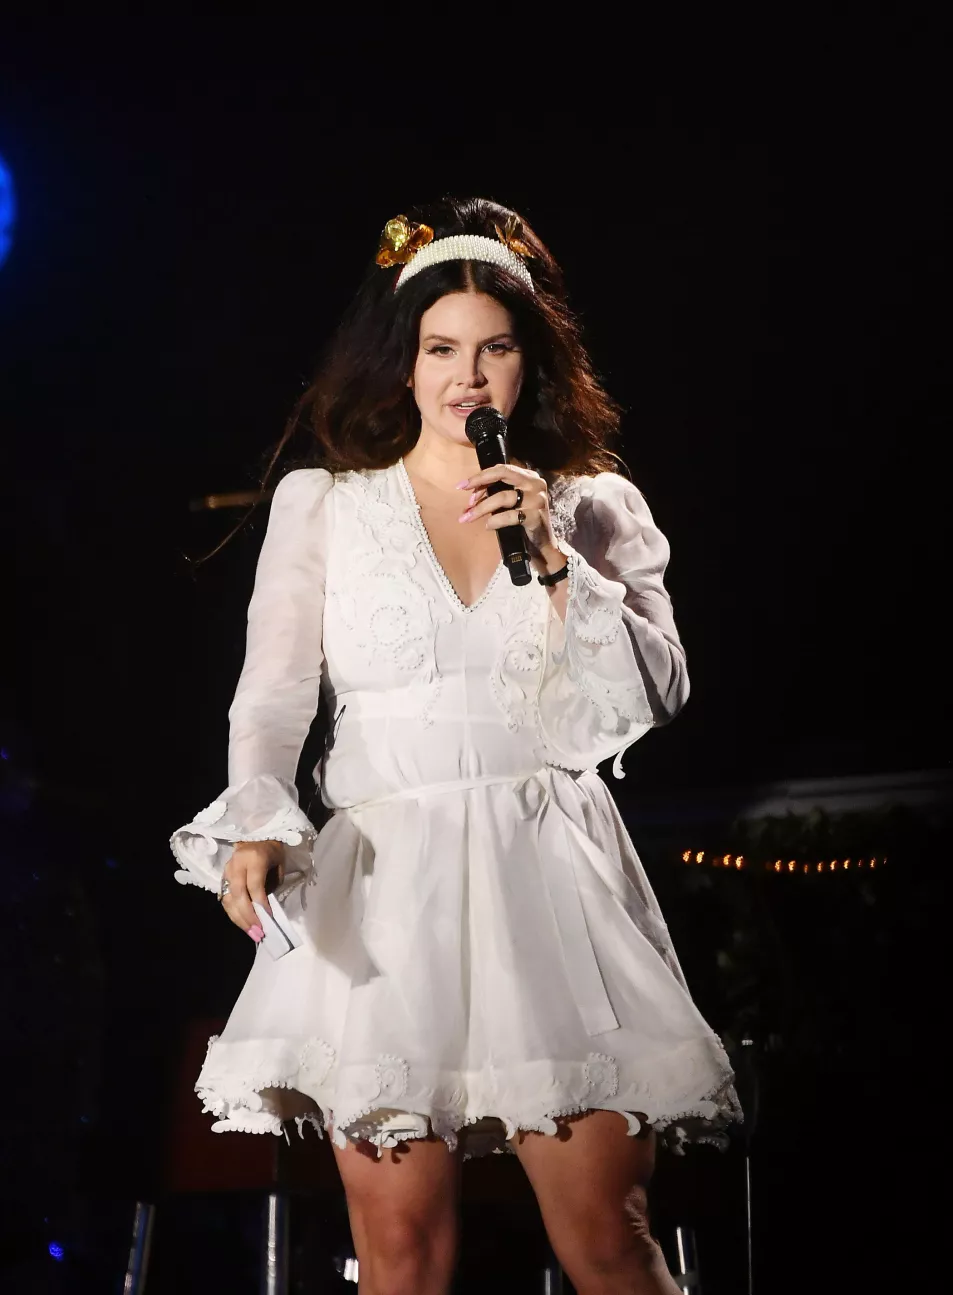 Lana Del Rey performs on stage in San Francisco